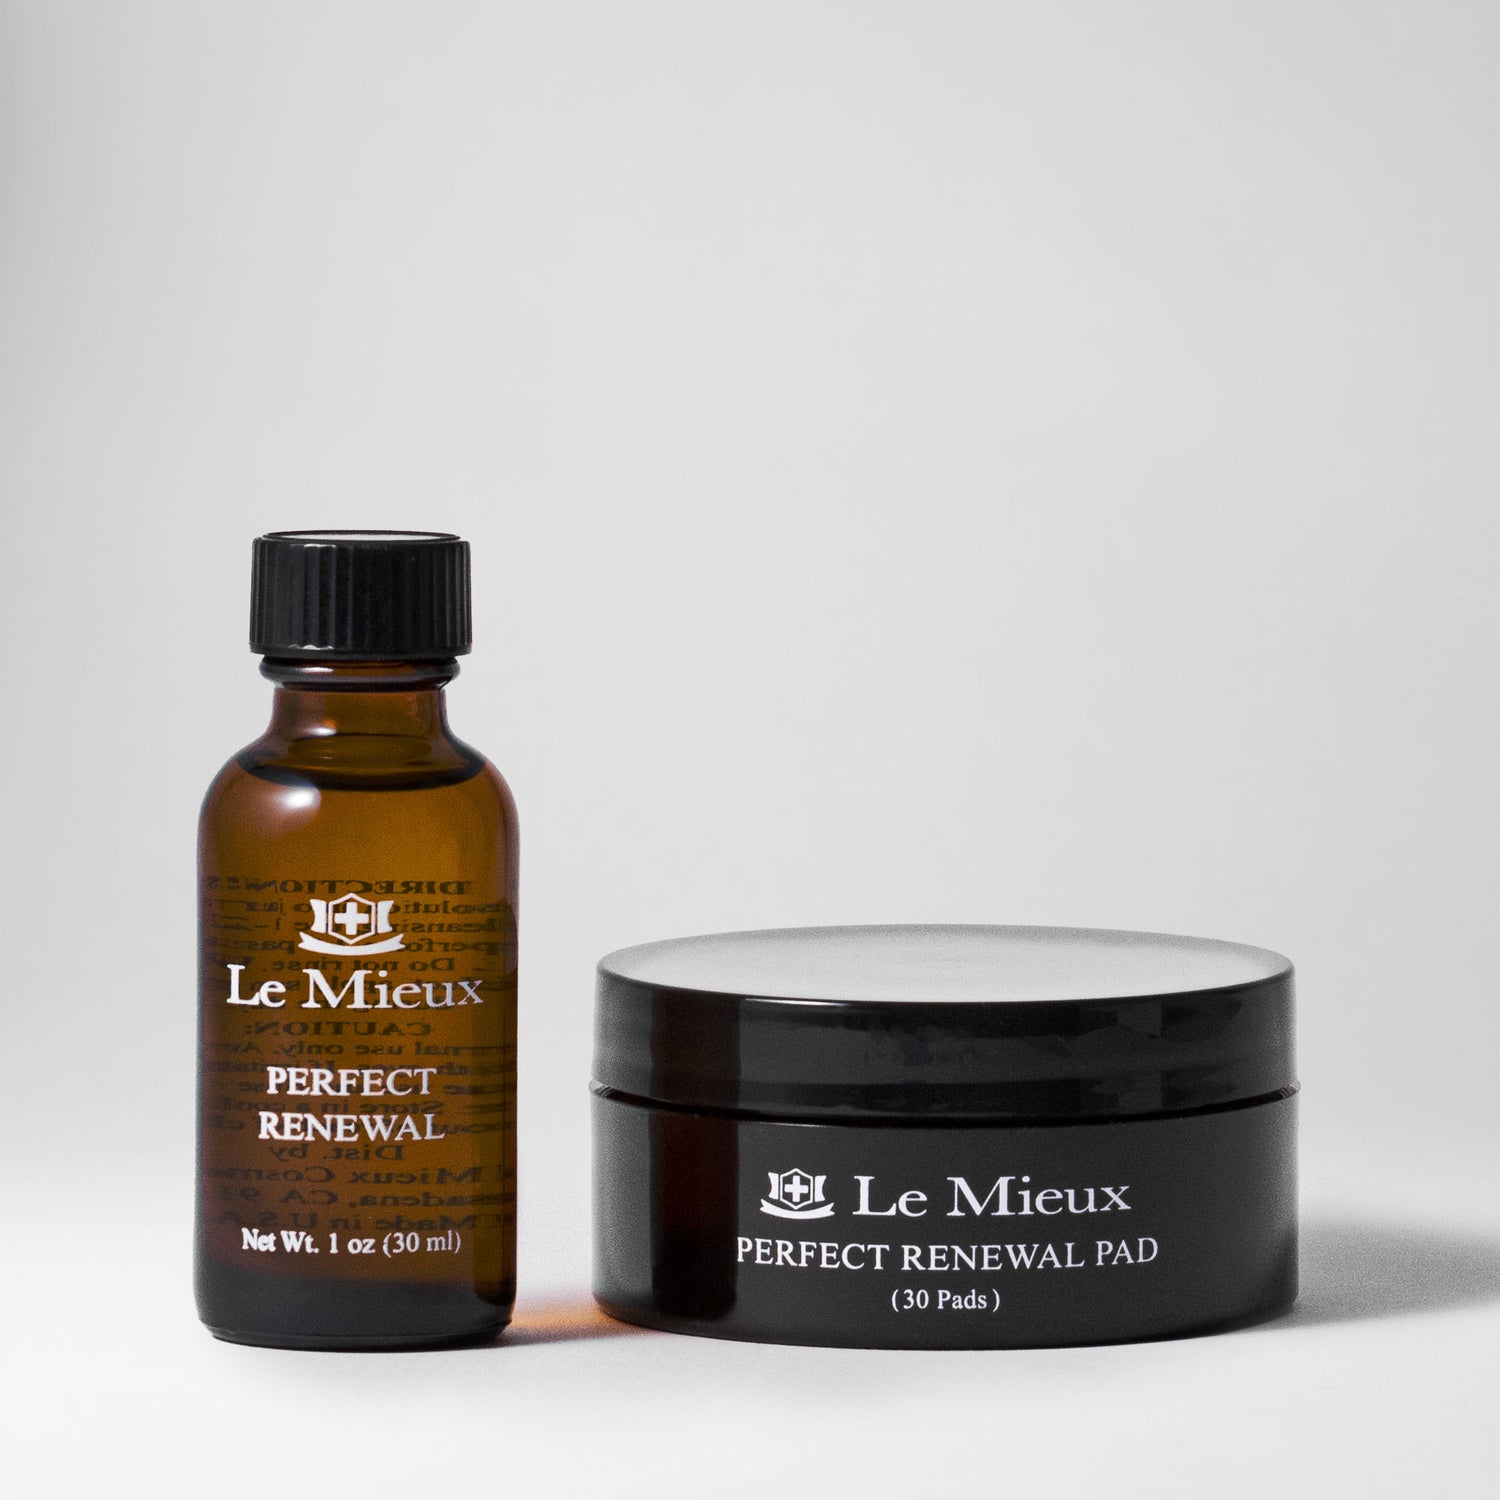  PERFECT RENEWAL from Le Mieux Skincare - 1